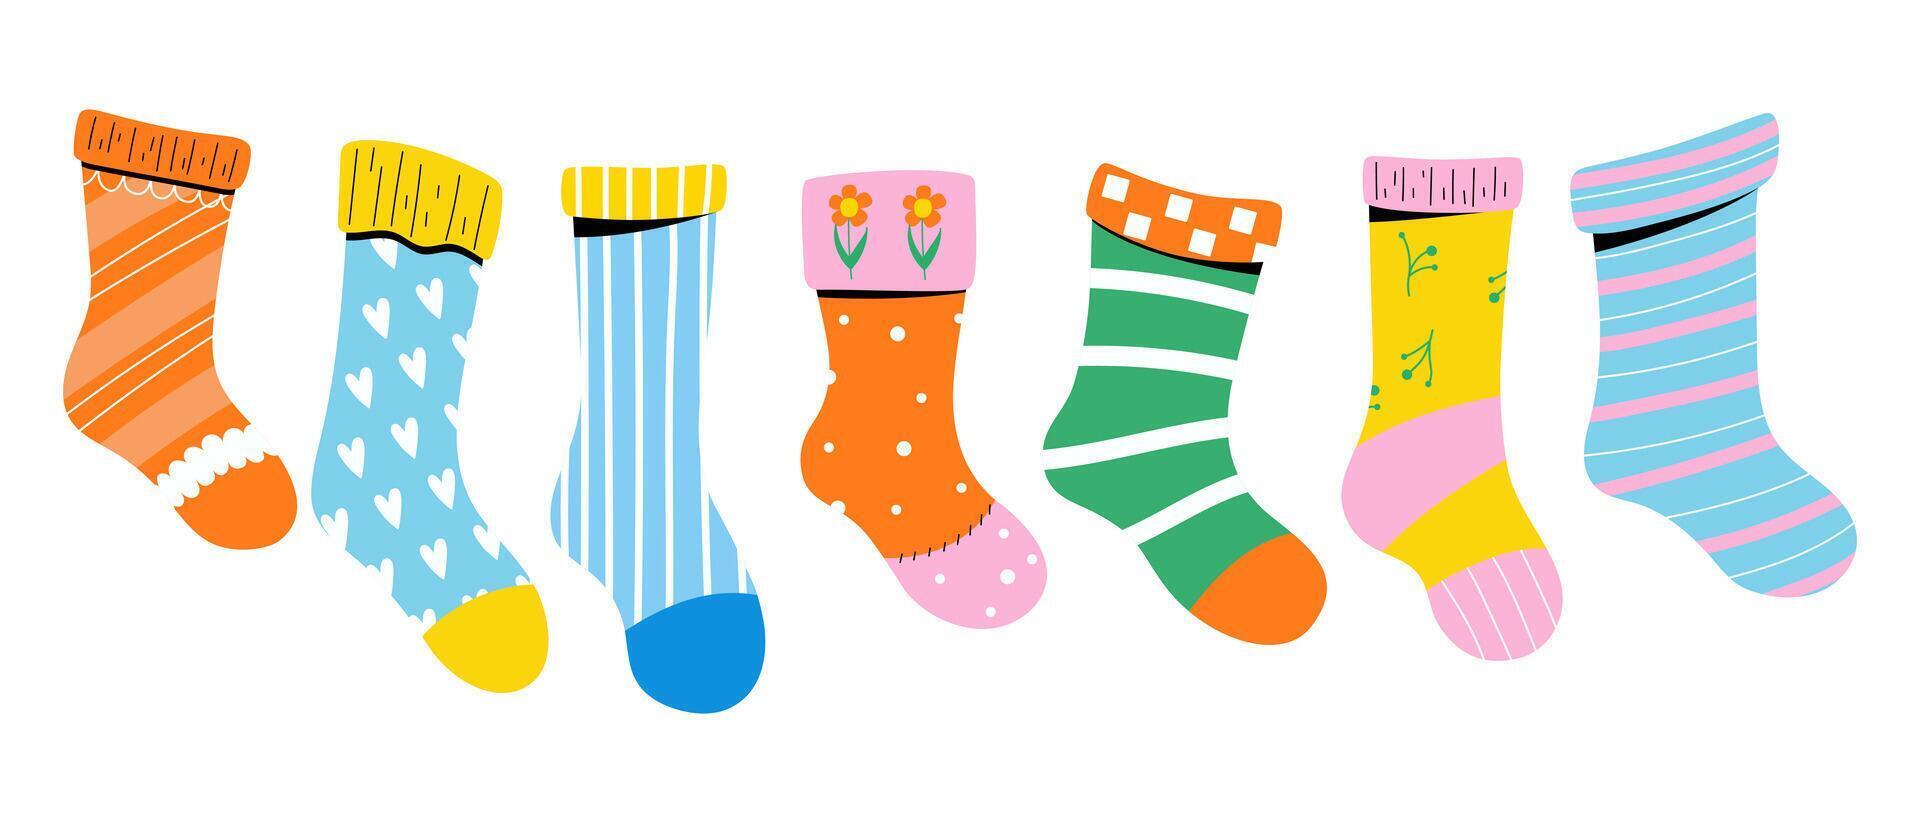 Baby socks with cute patterns and textures. Vector graphics.